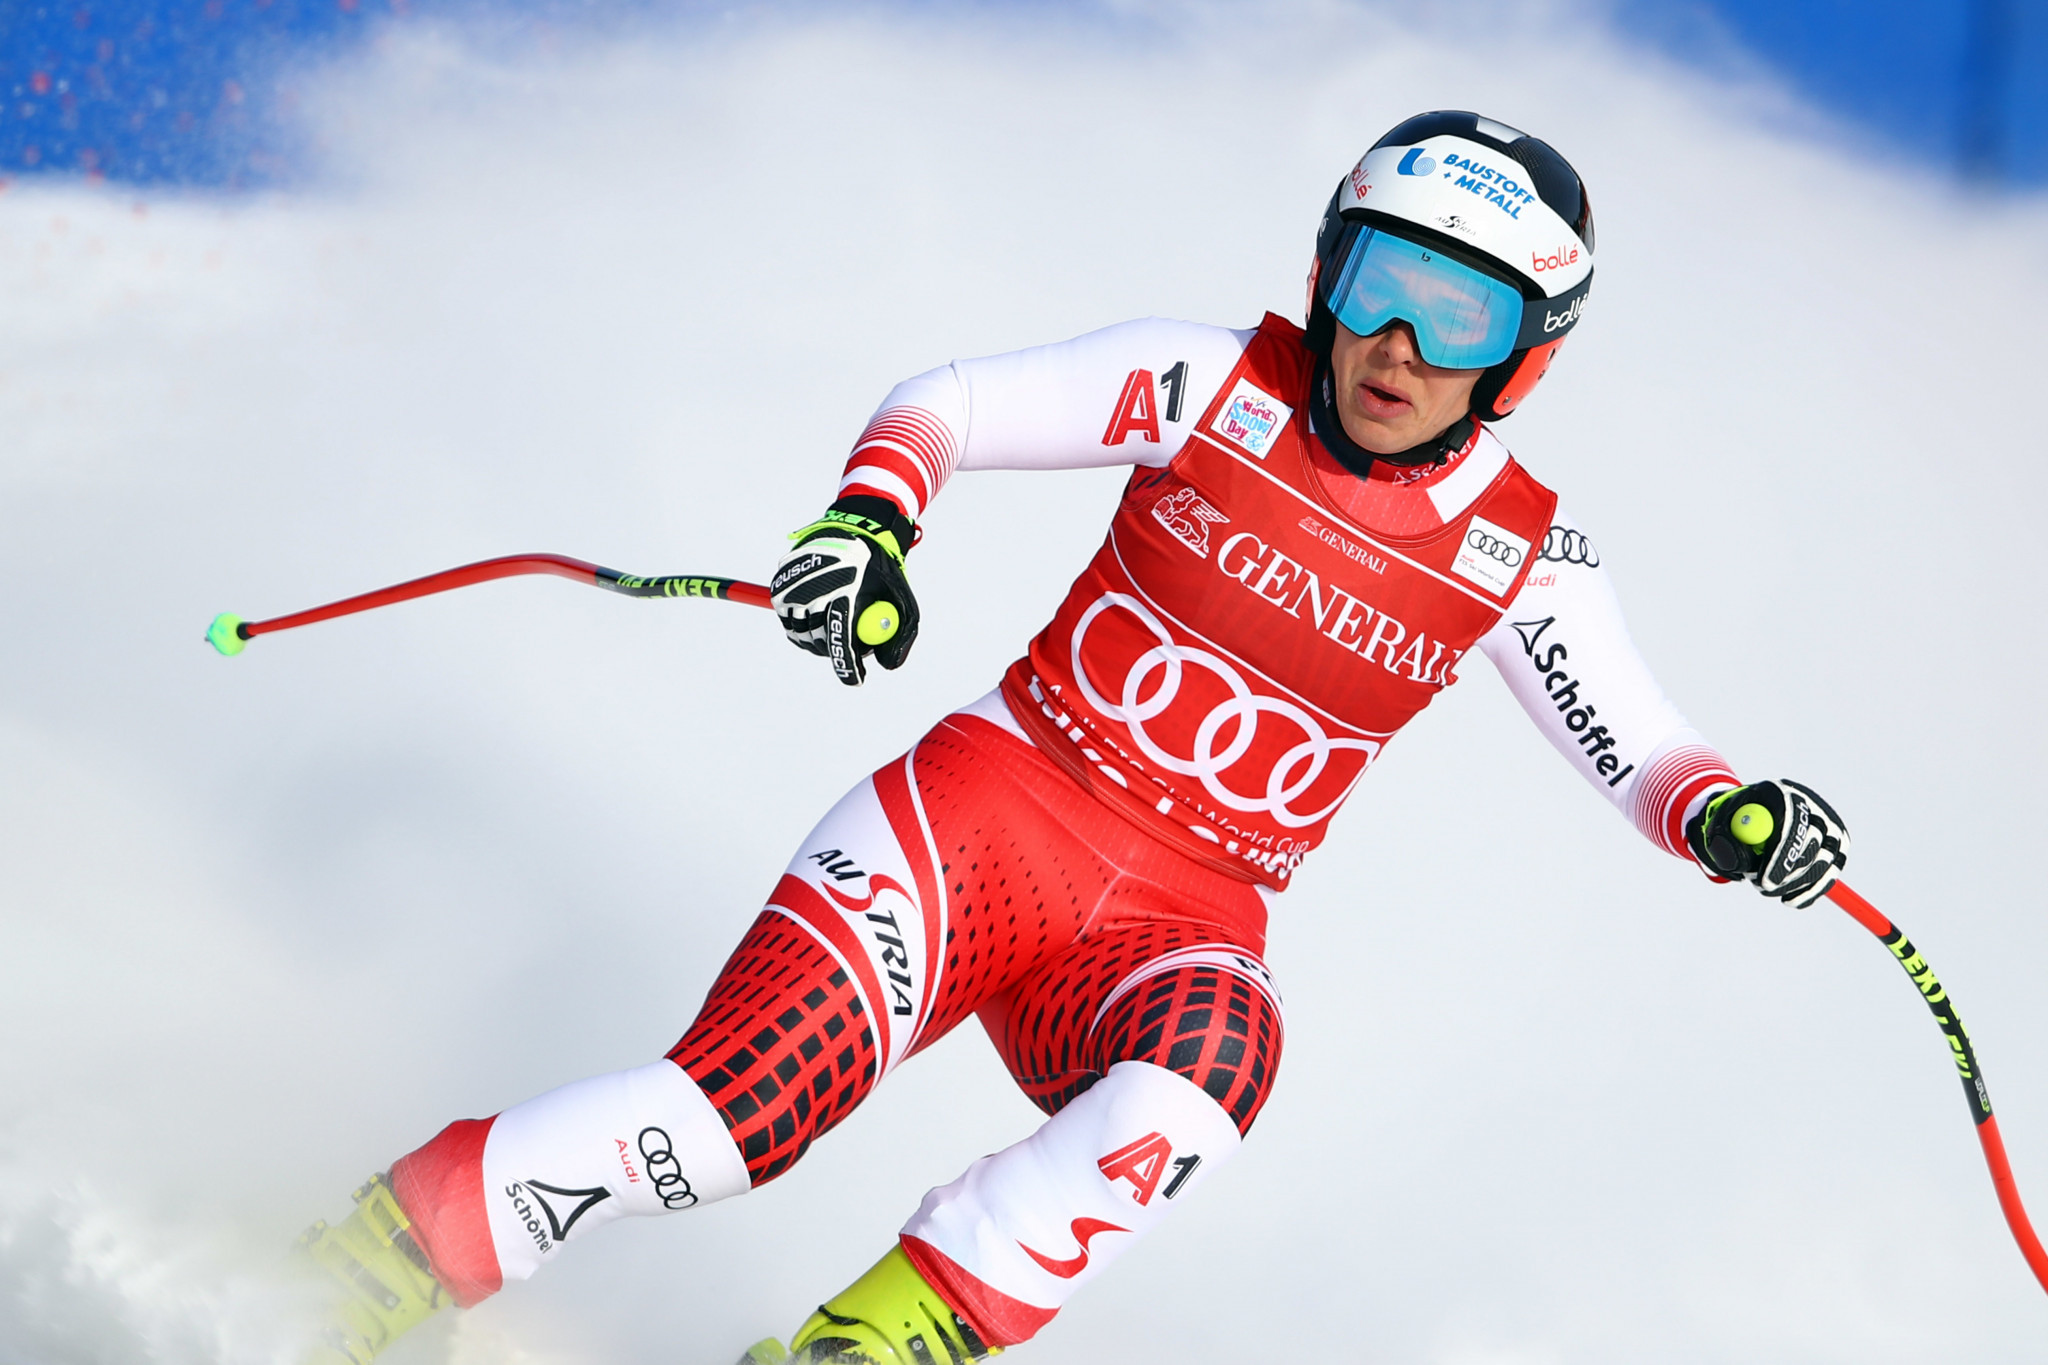 Nicole Schmidhofer won her second consecutive downhill race in Lake Louise ©Getty Images